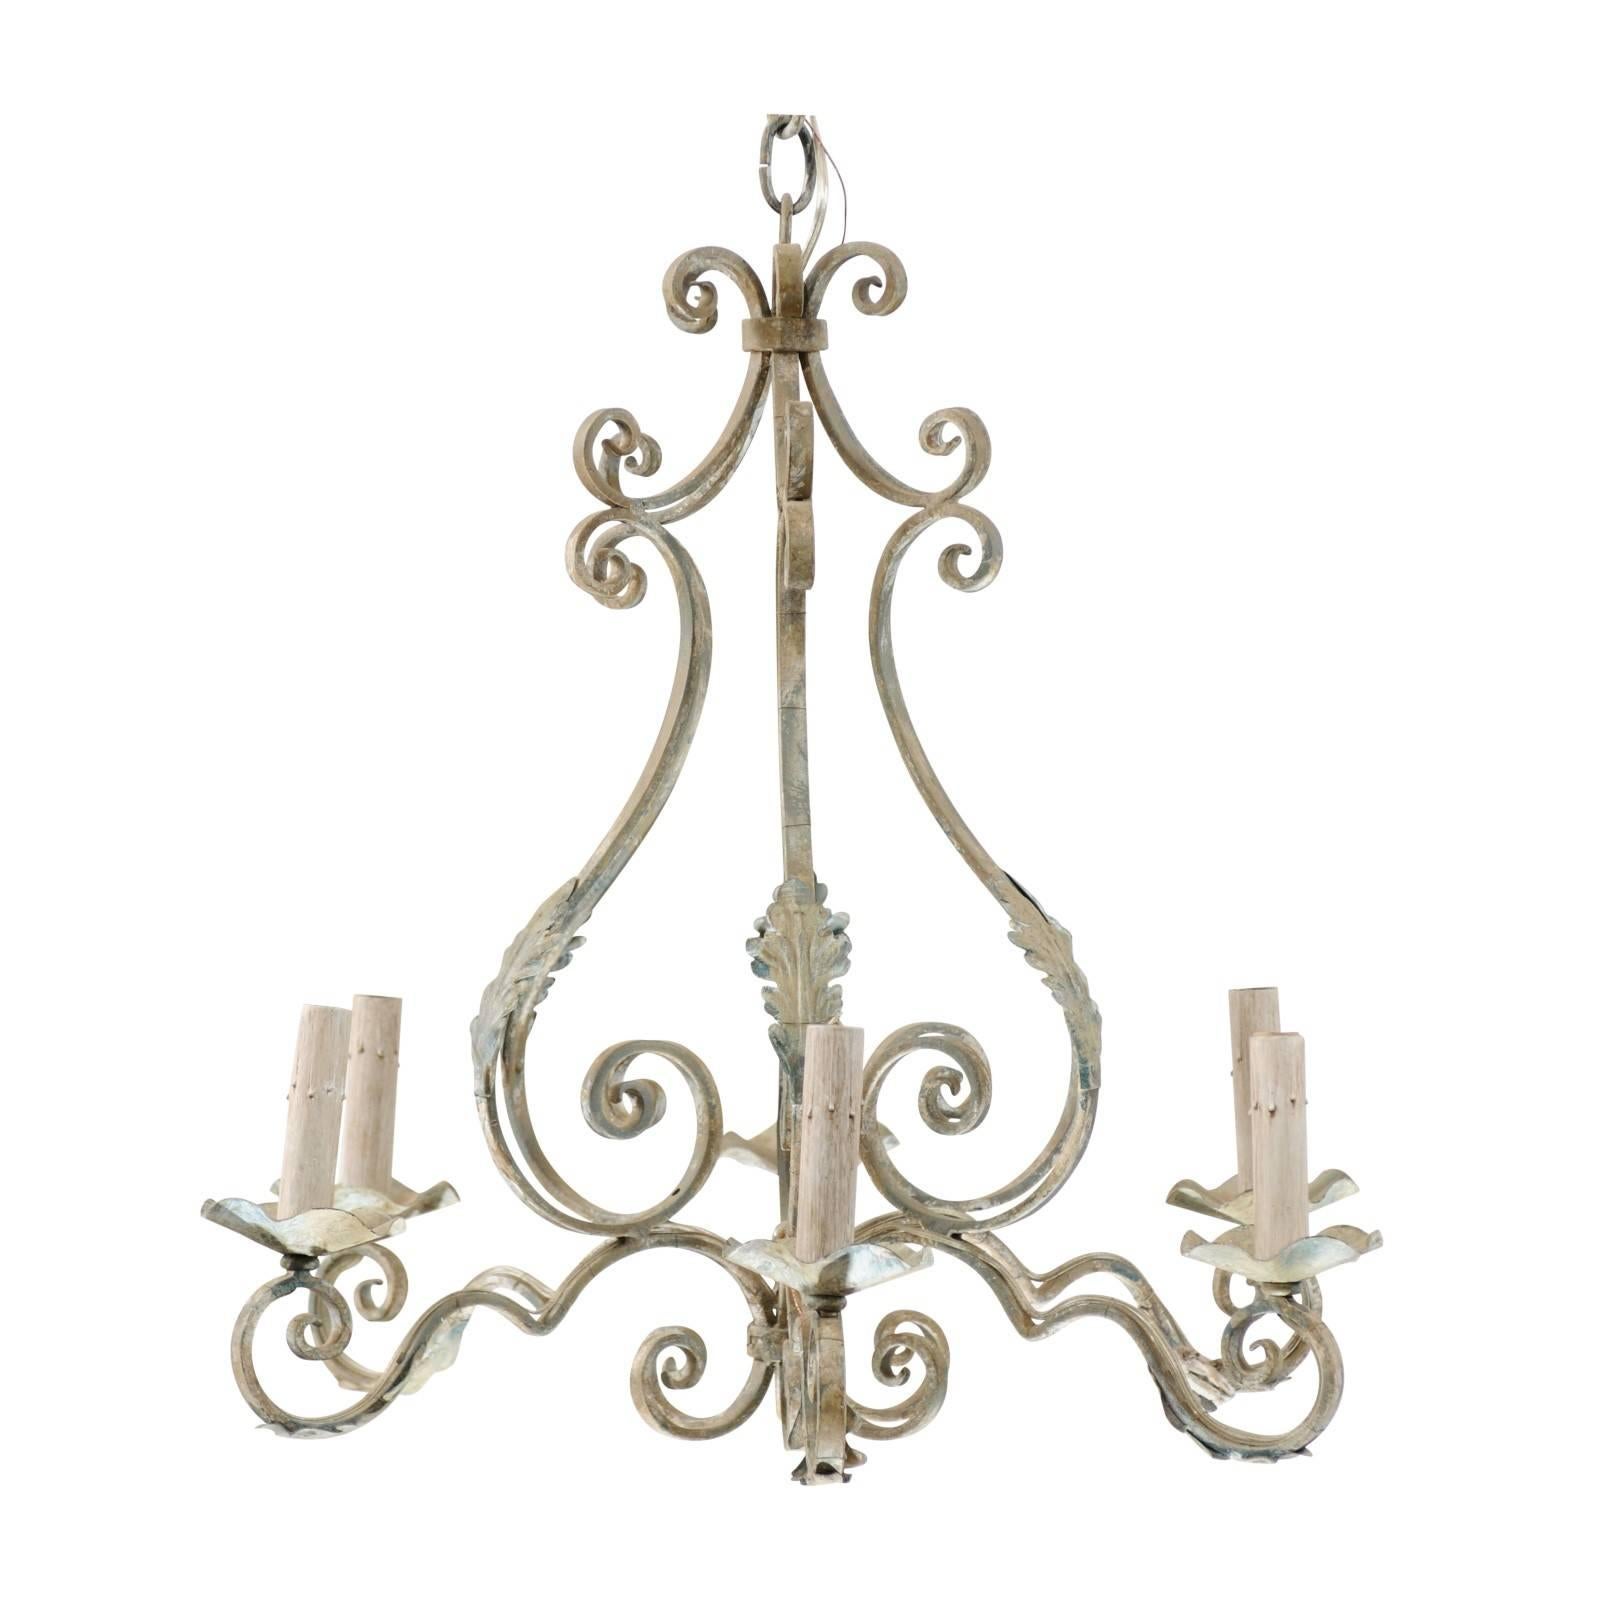 French Six-Light Pear Shaped Painted Iron Chandelier with Ornate Scrolls For Sale